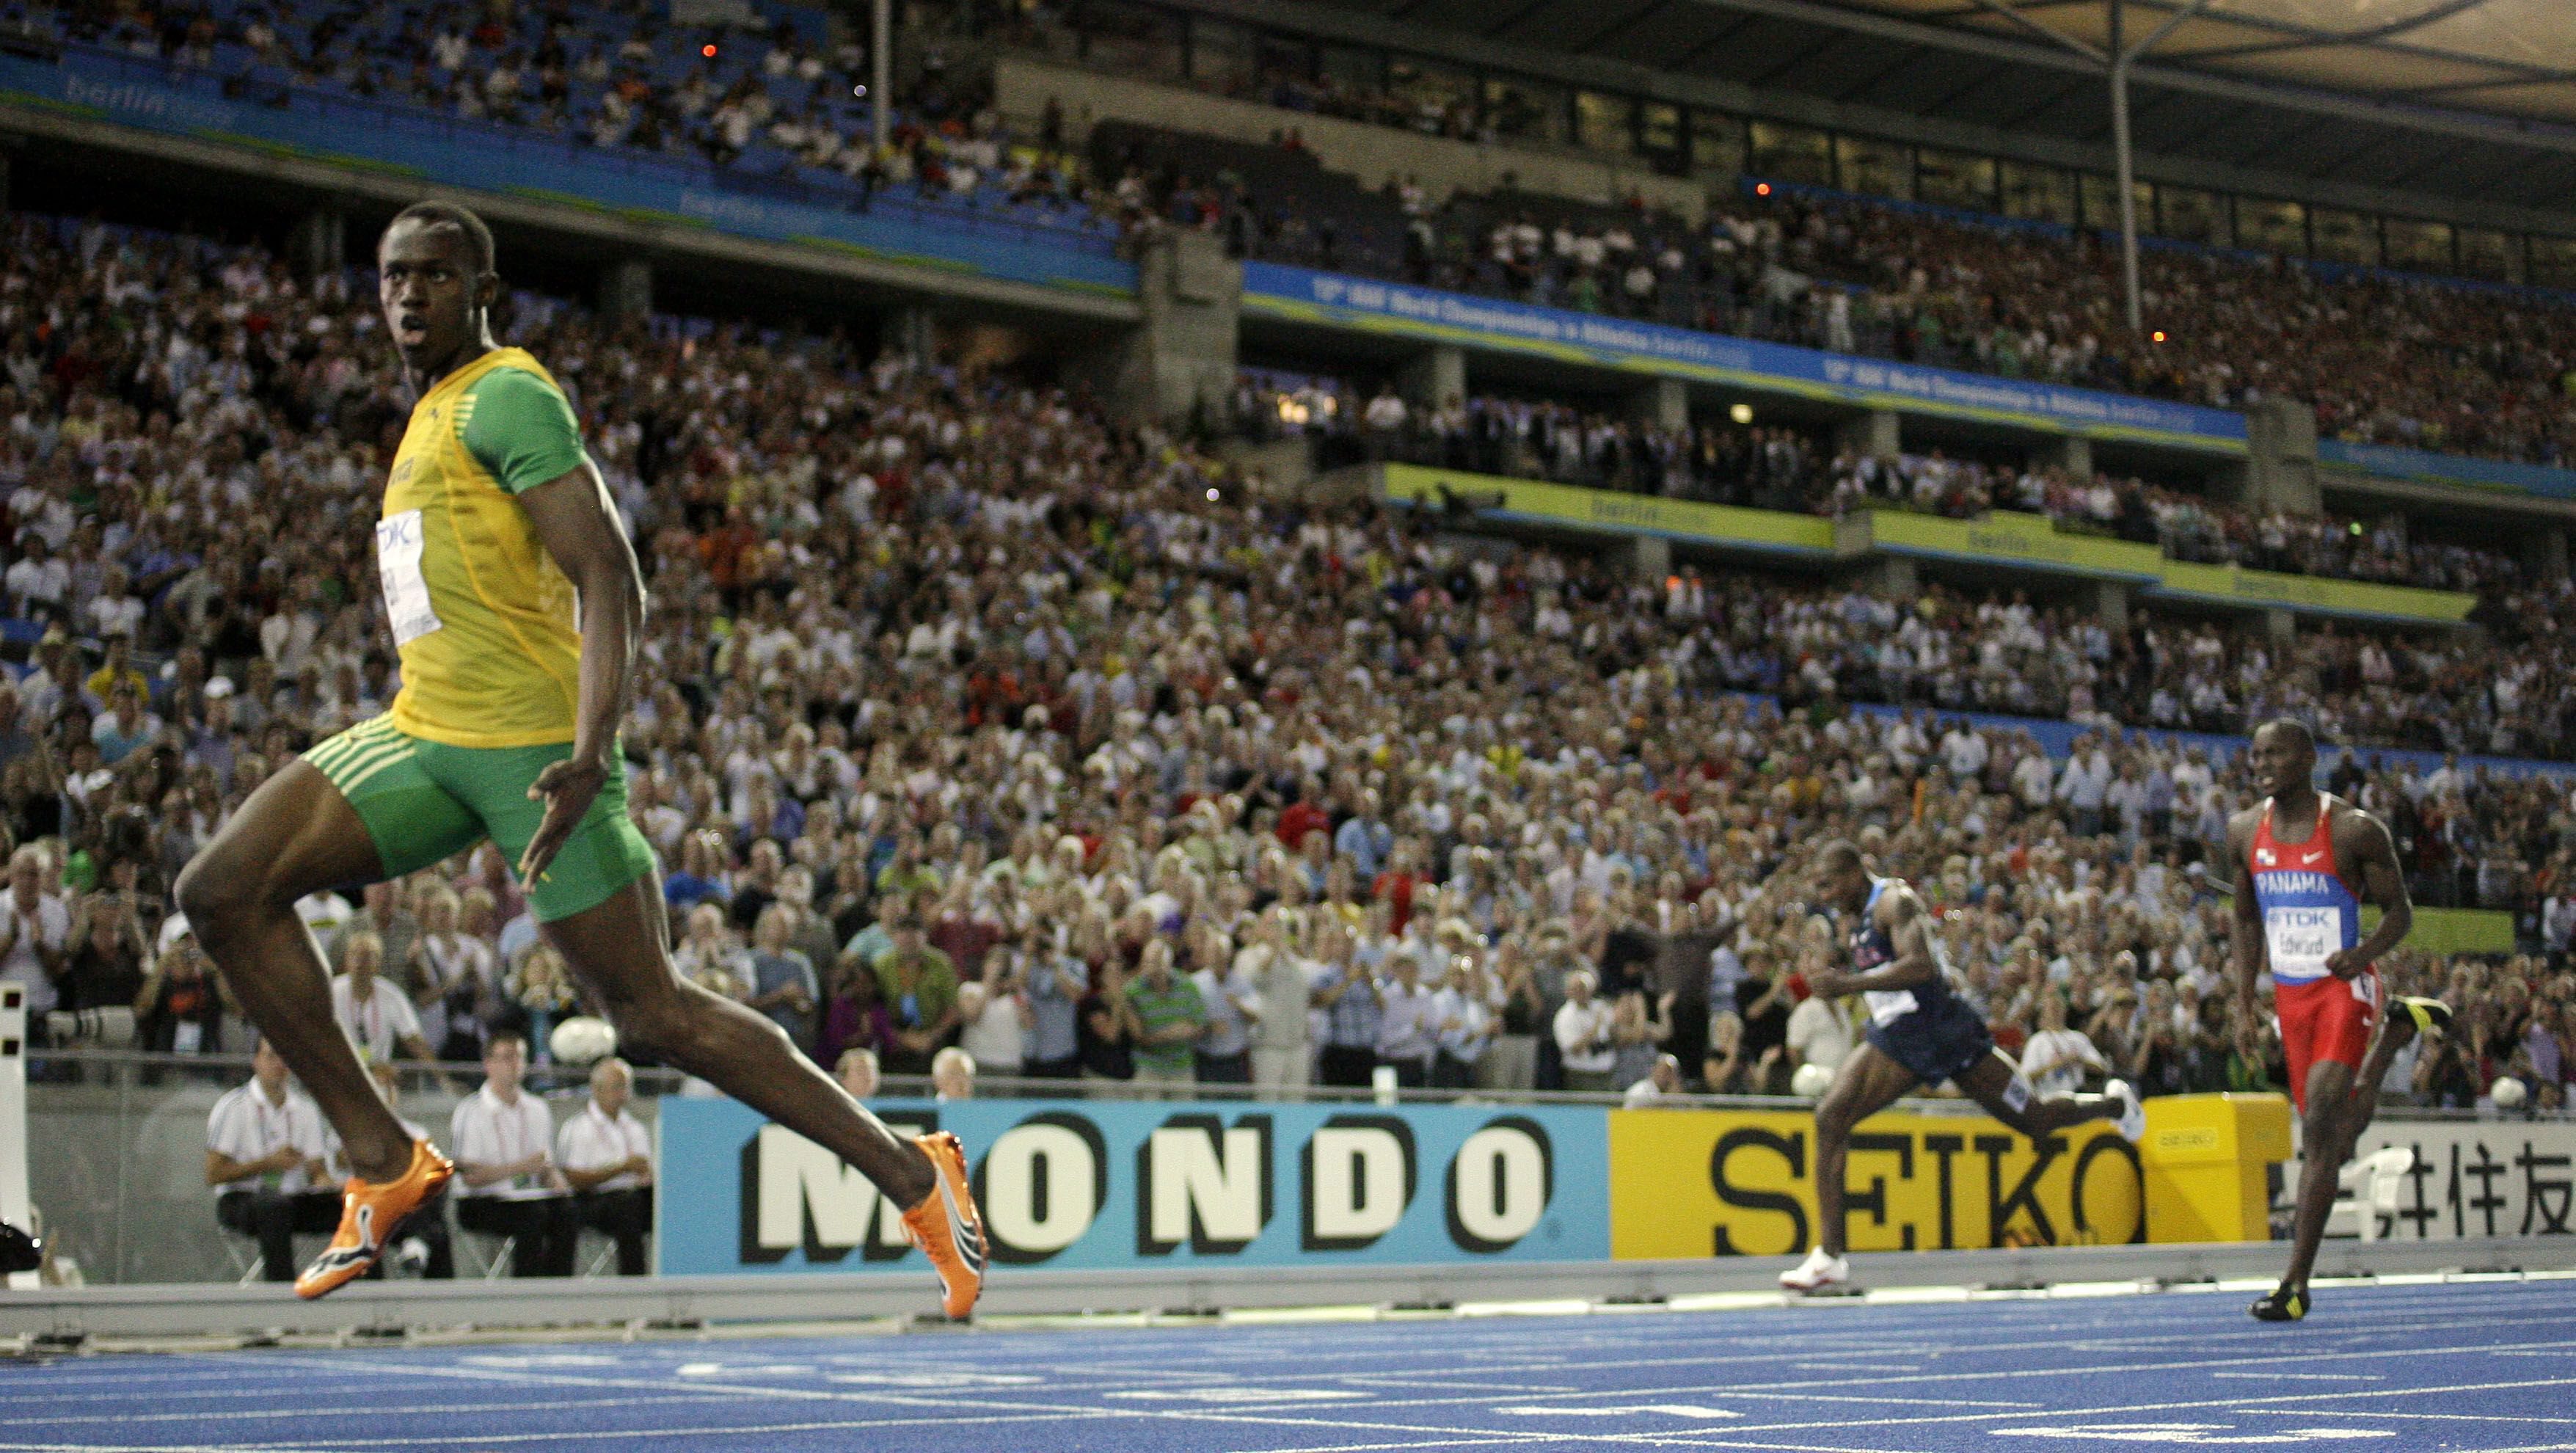 Usain Bolt crosses the finish line to setting a new World Record as he wins the Men's 200m final during the World Athletics Championships in Berlin, 2009